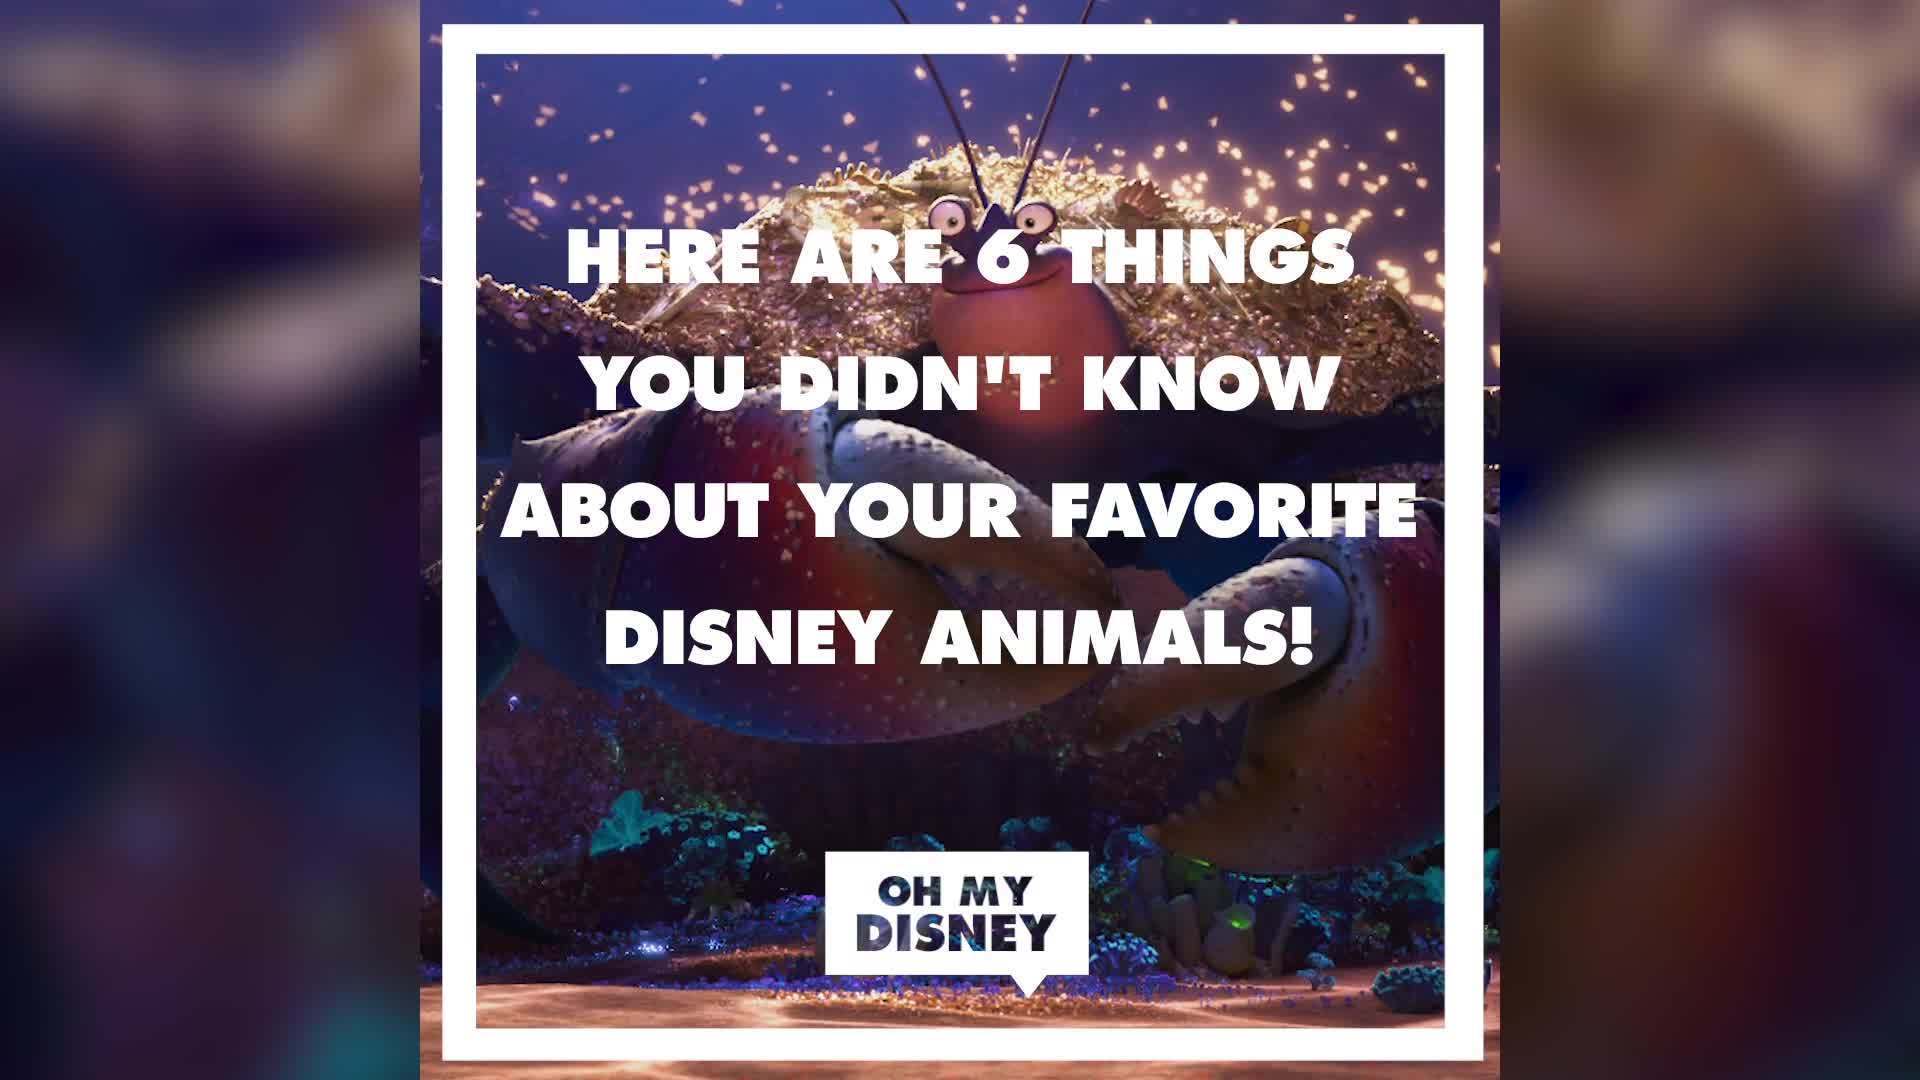 7 Things You Didn't Know About Your Favorite Disney Animals | Oh My Disney